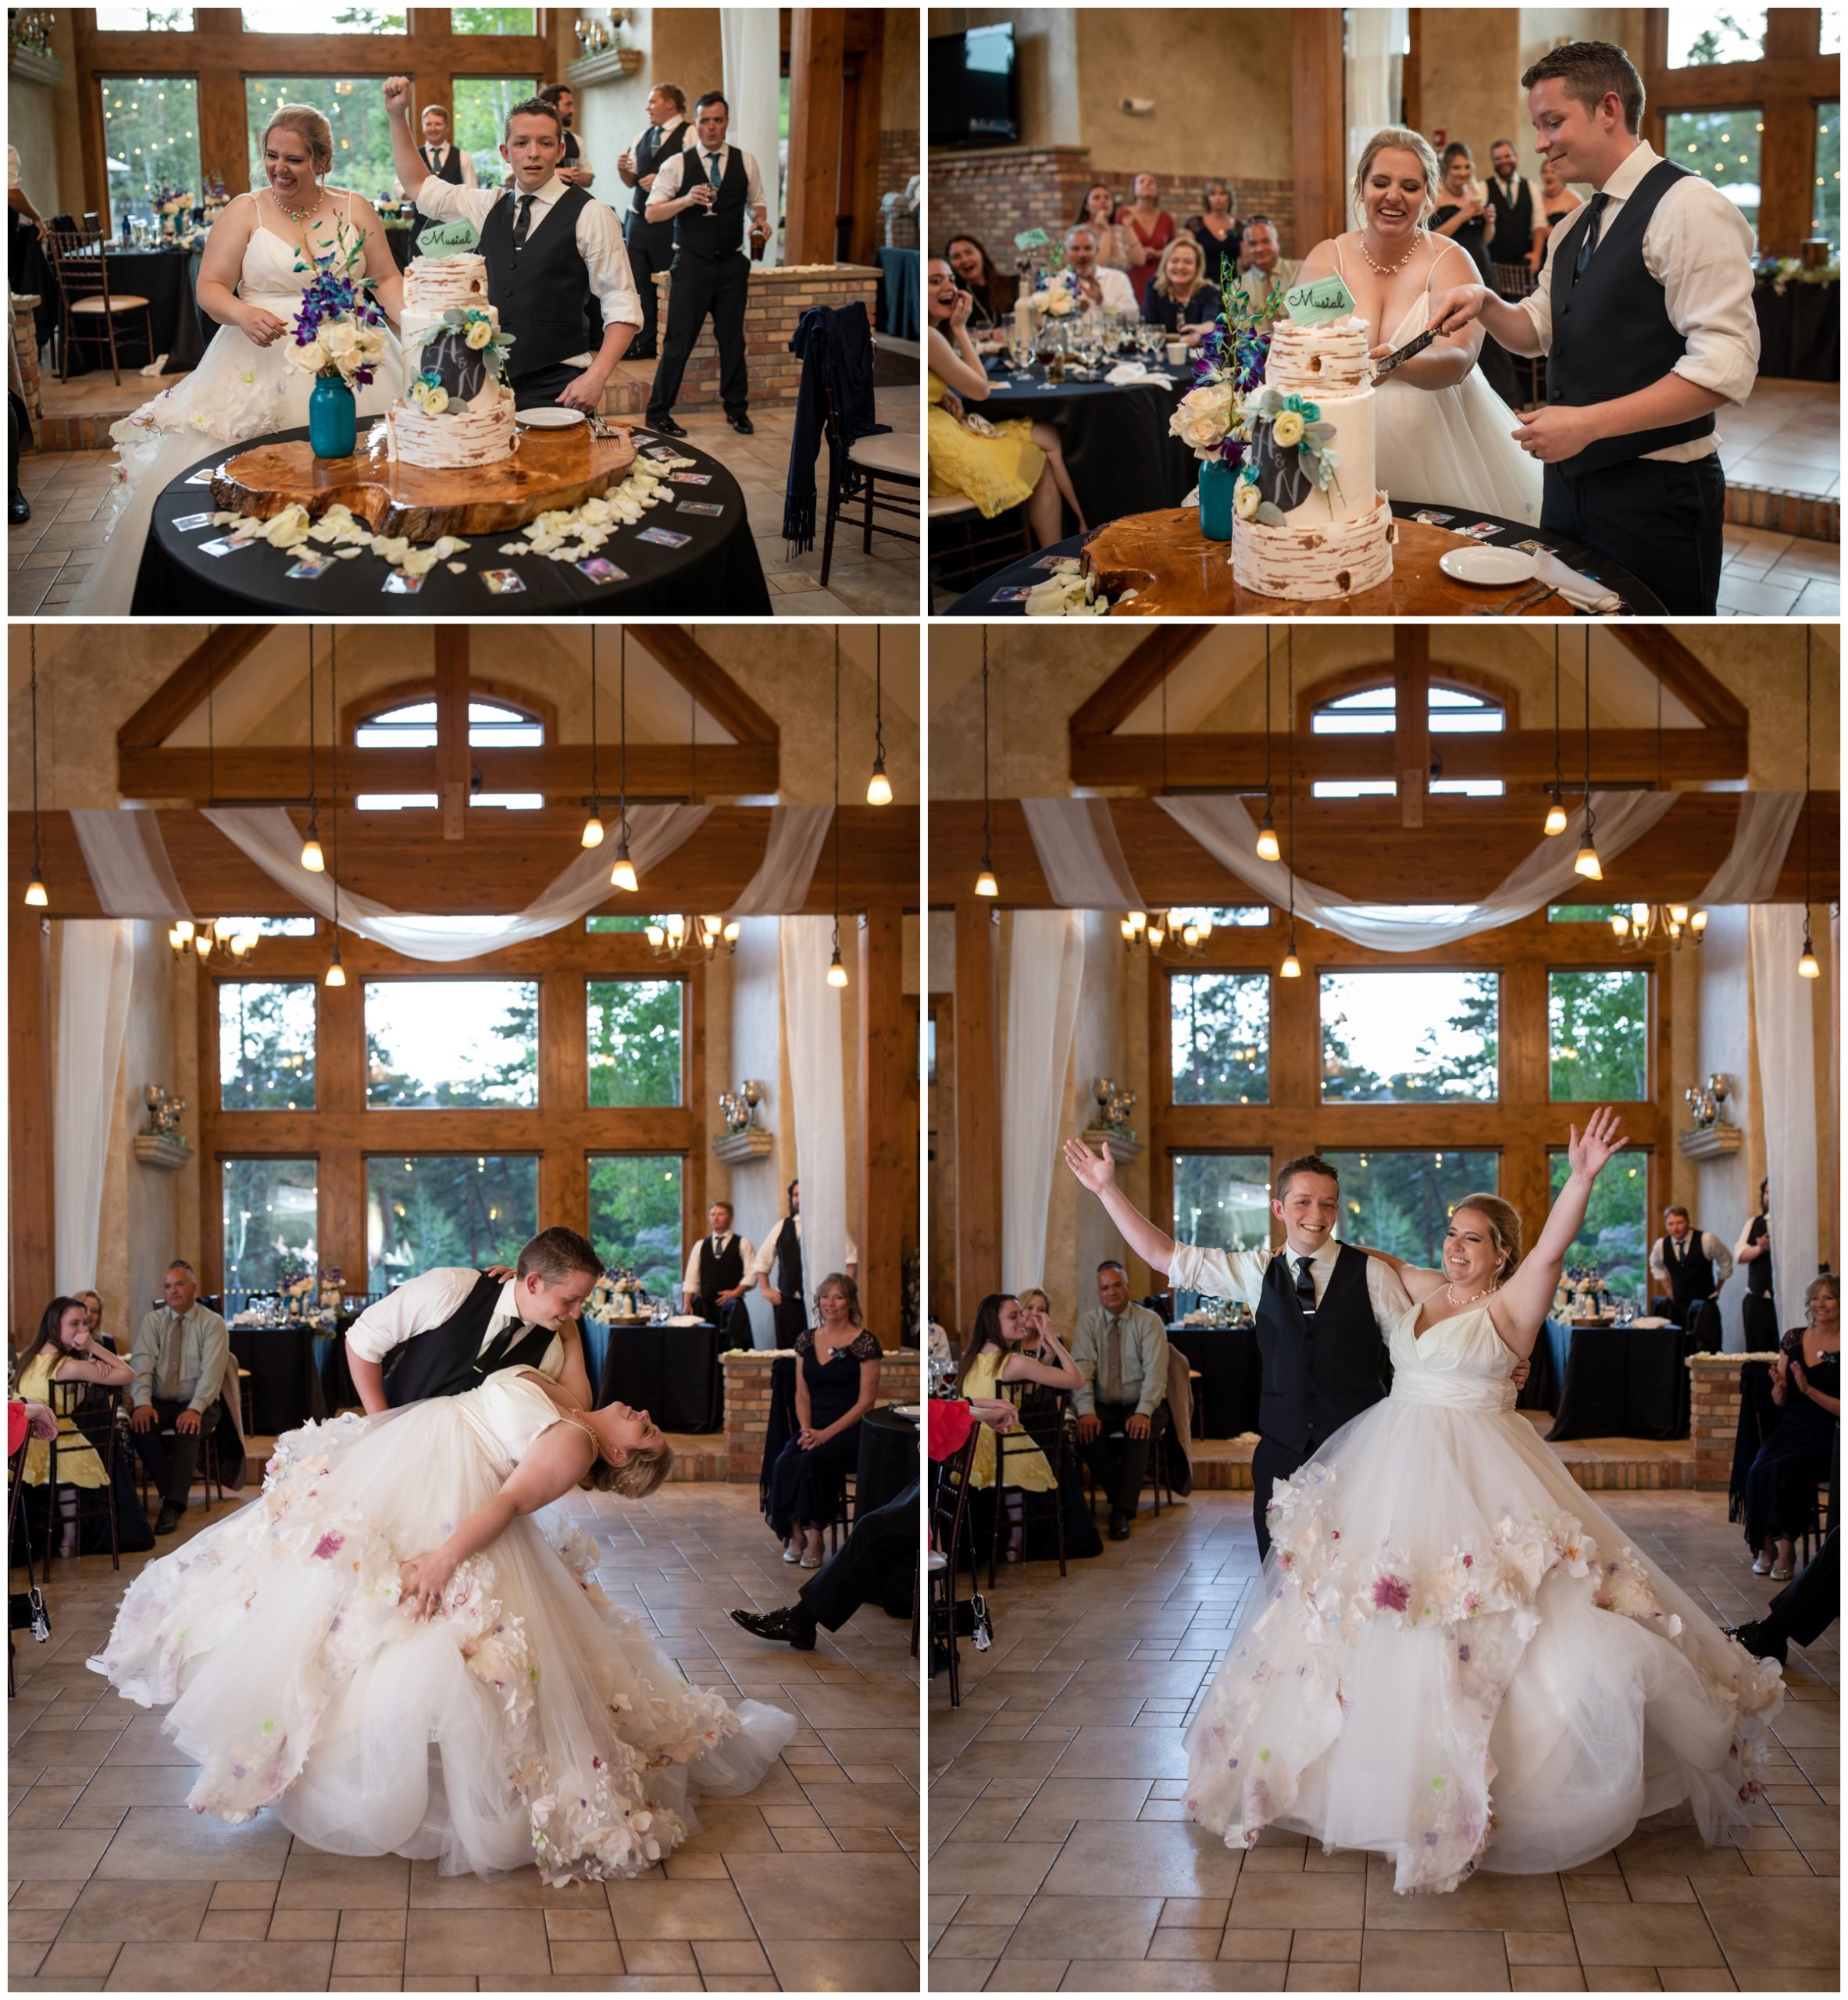 groom dipping bride during first dance at Della Terra Mountain Chateau wedding reception 